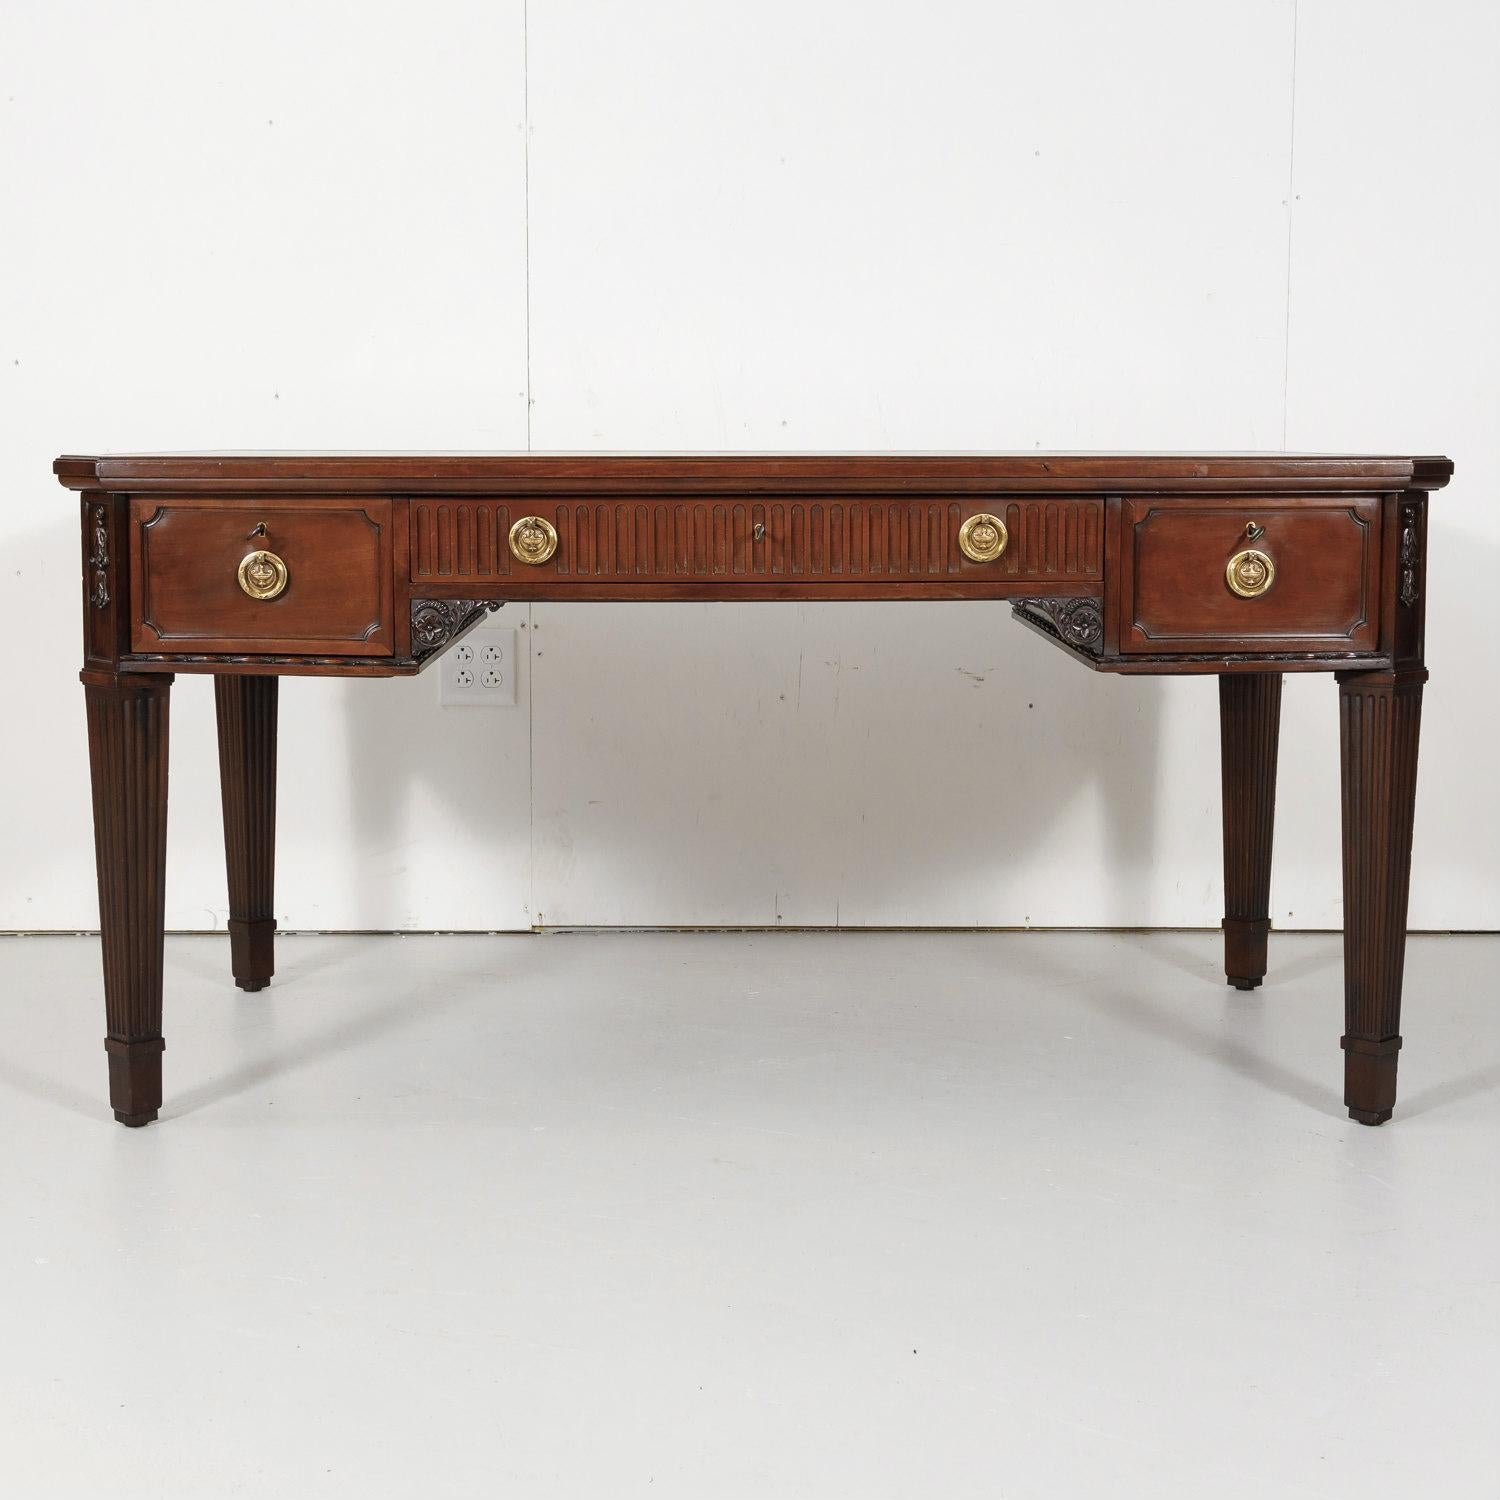 A fine 19th century French Louis XVI style bureau plat handcrafted of solid walnut by talented artisans in Lyon for the wealthy owner of a Maison de maître, having gilt bronze pulls and the original black tooled leather writing surface, circa 1850s.